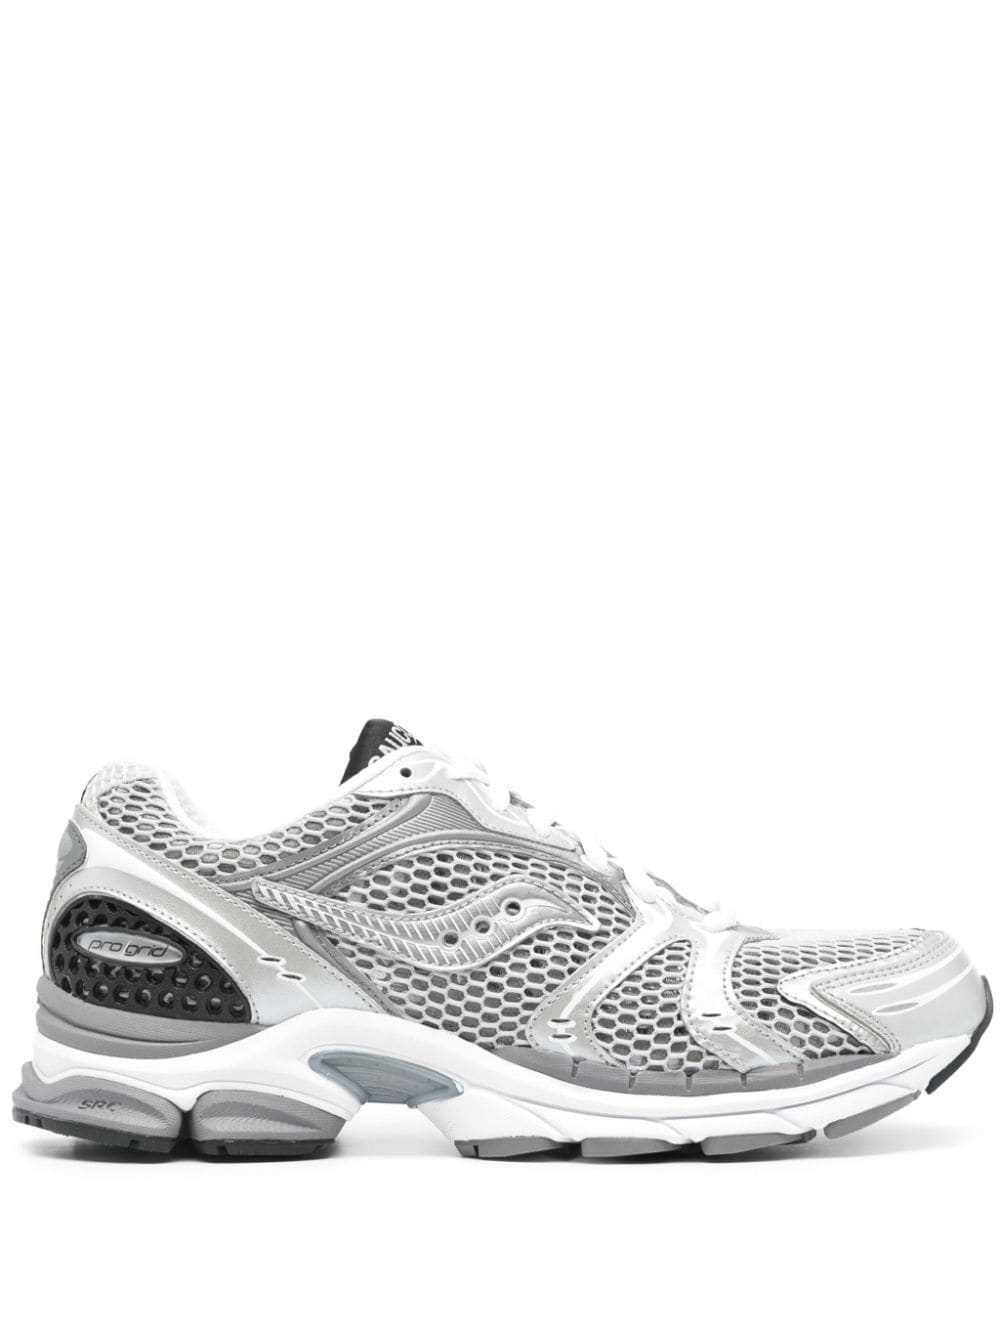 Saucony Progrid Triumph 4 Sneakers In Grey